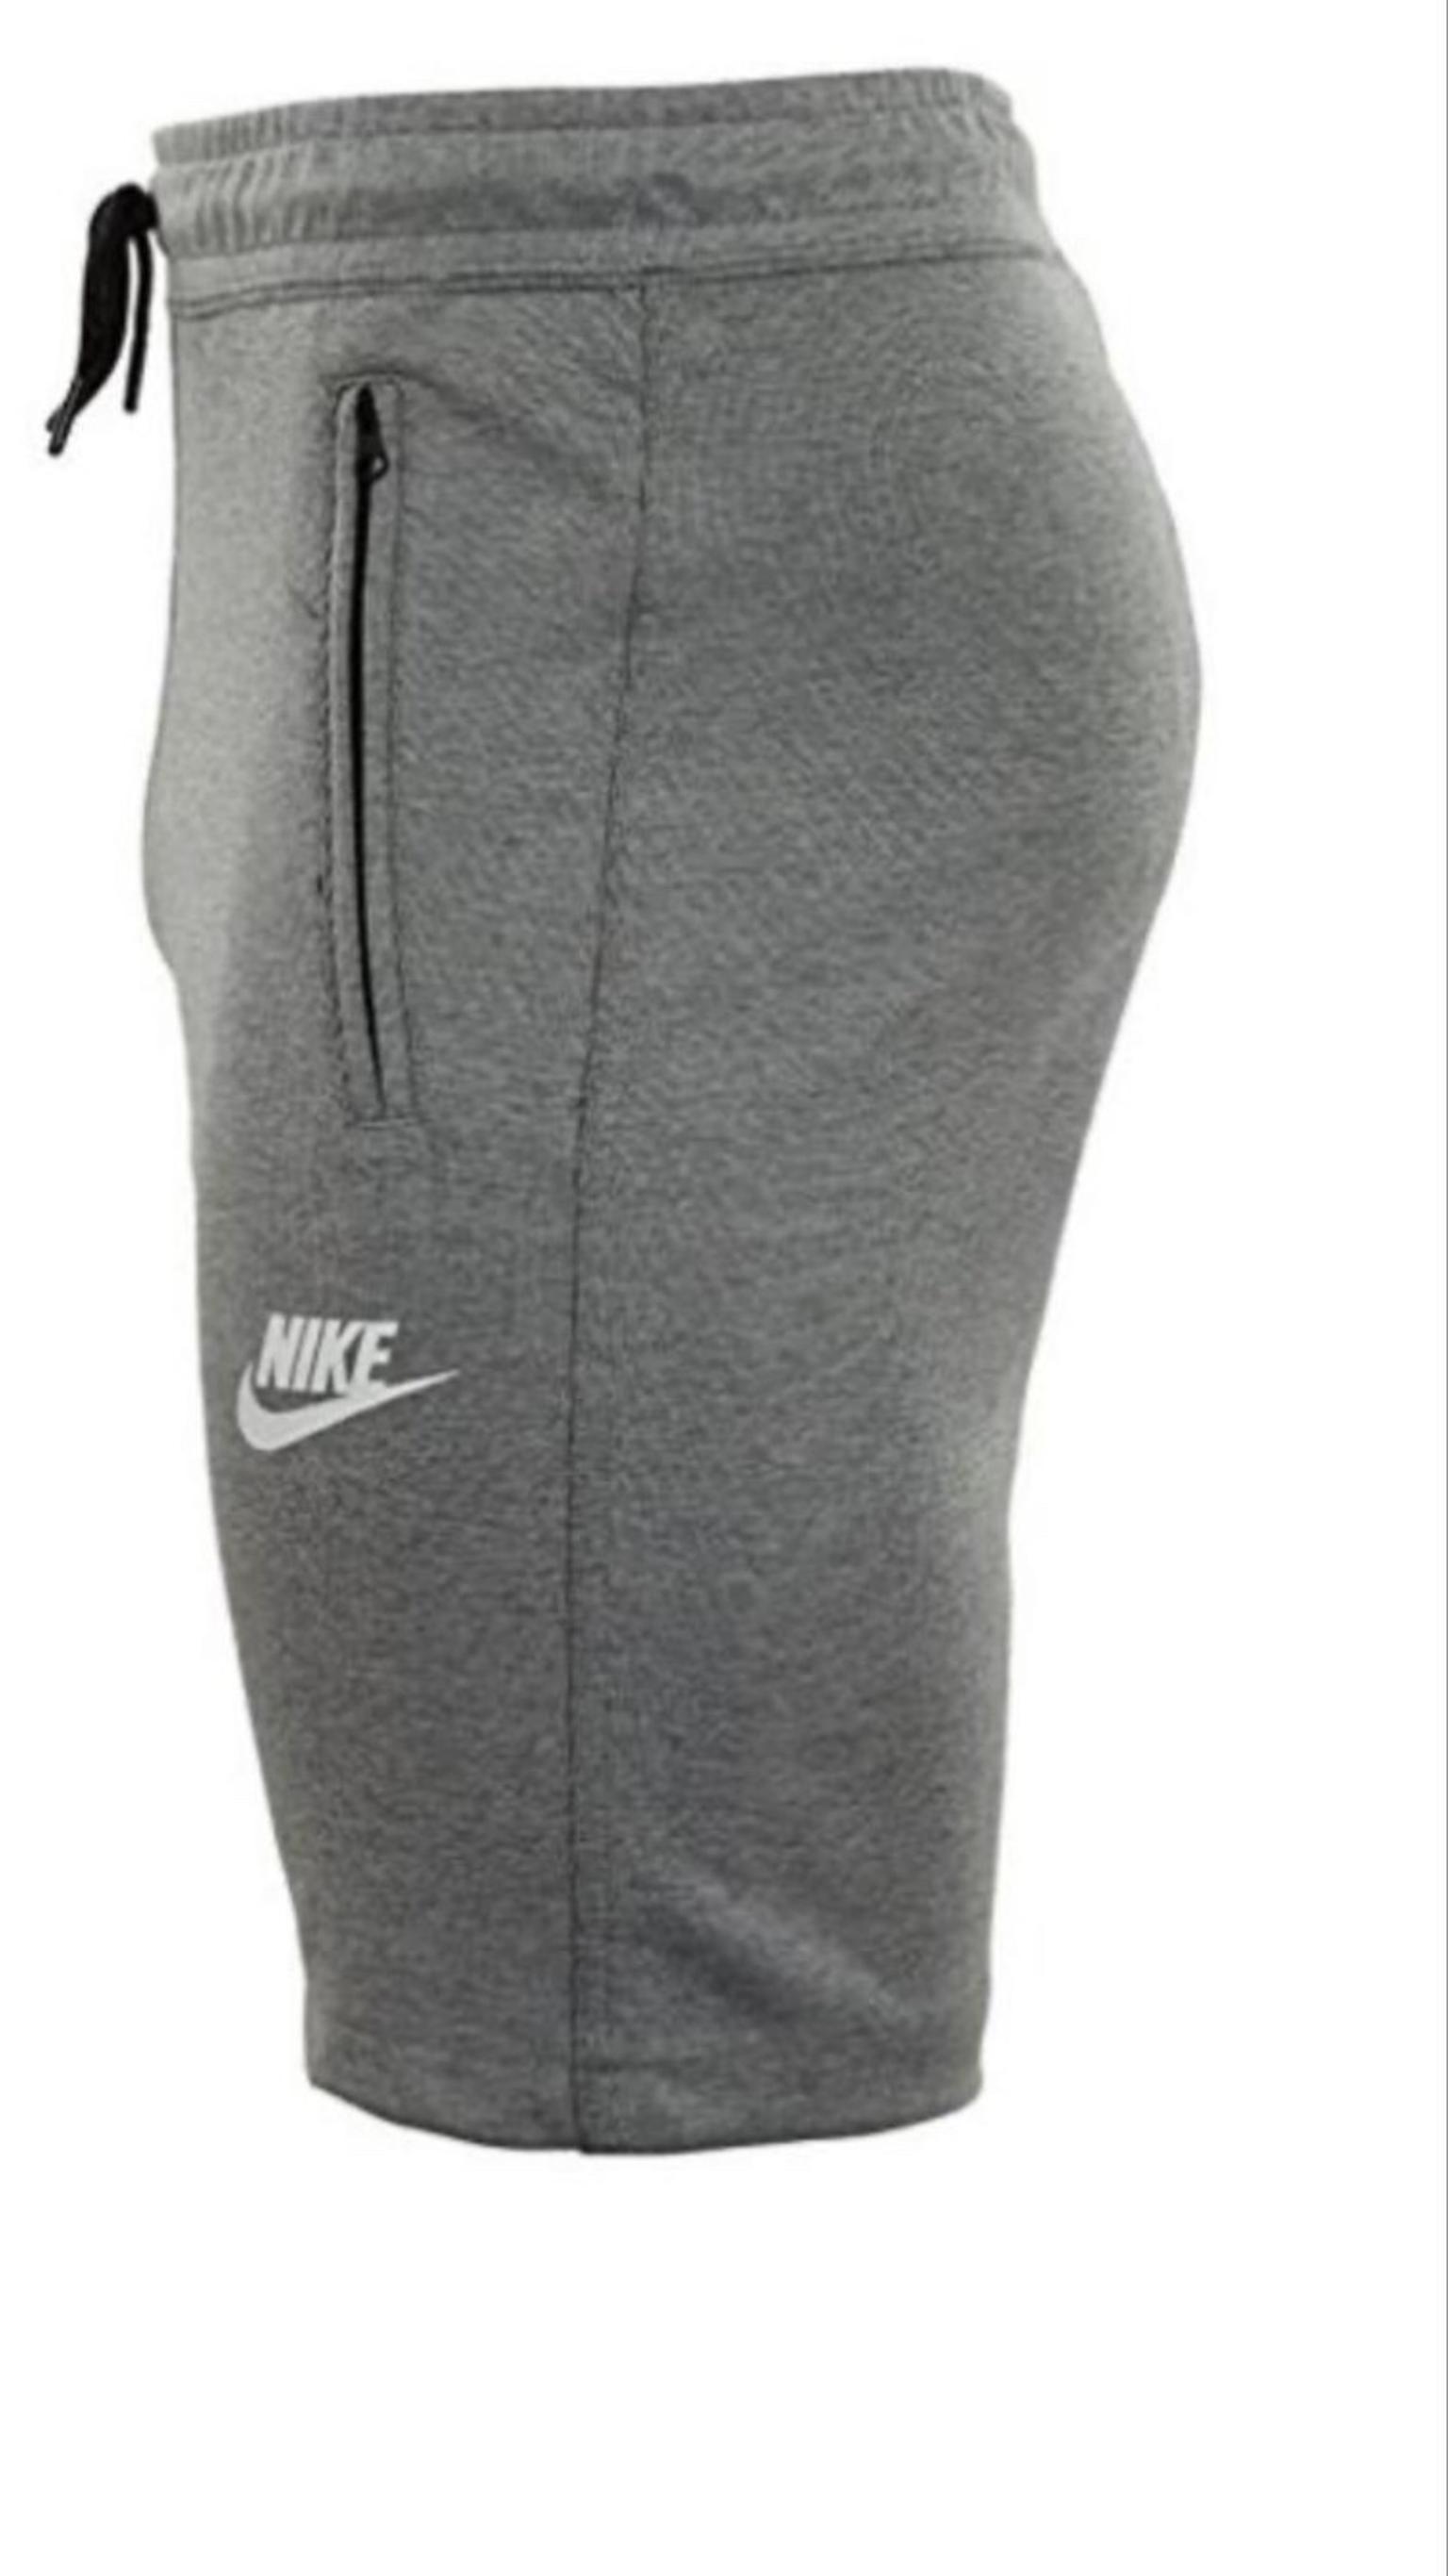 nike shorts with zip